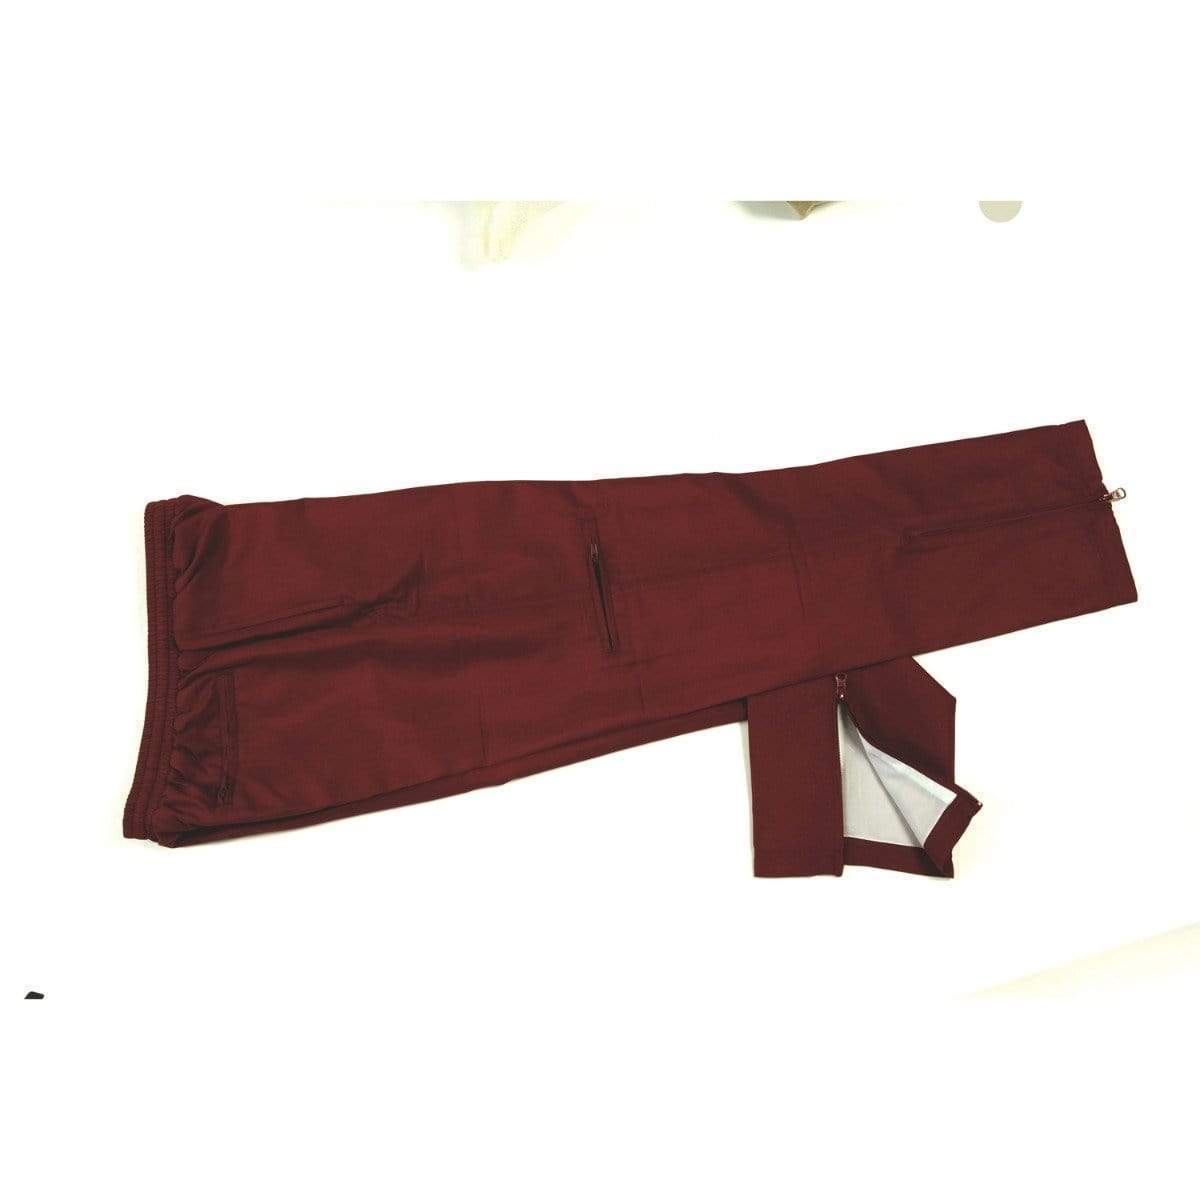 Dnc Workwear Kid’s Ripstop Athens Track Pants - 5537 Active Wear DNC Workwear Maroon S 